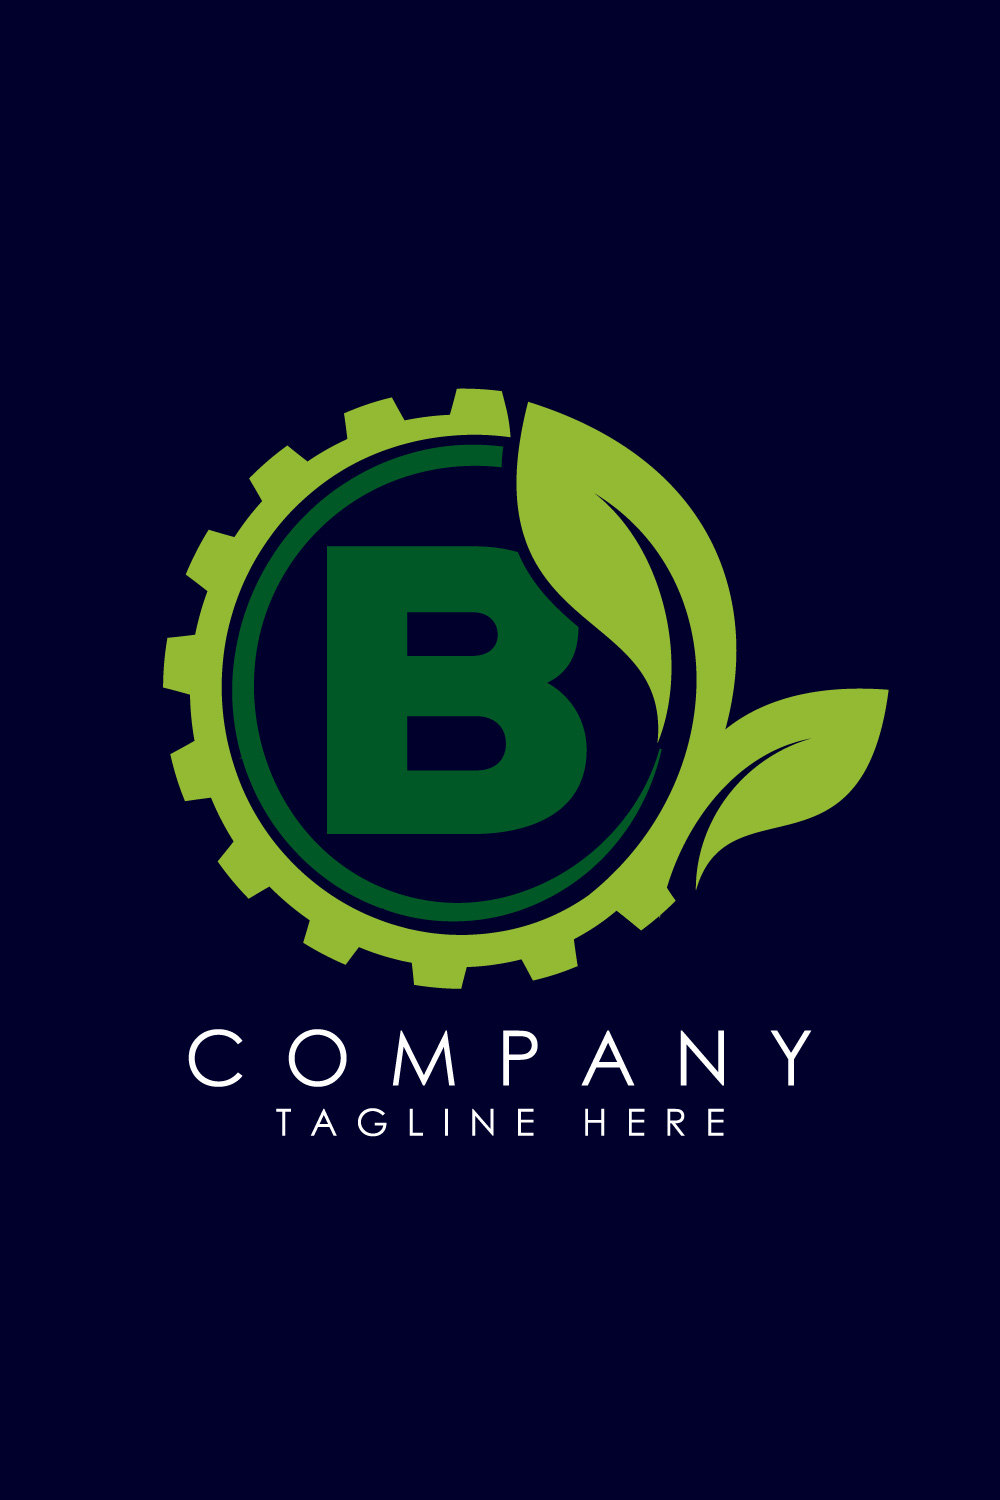 English alphabet B with gear and leaf Eco technology logo, Green eco tech logo template design vector Nature Industry pinterest preview image.